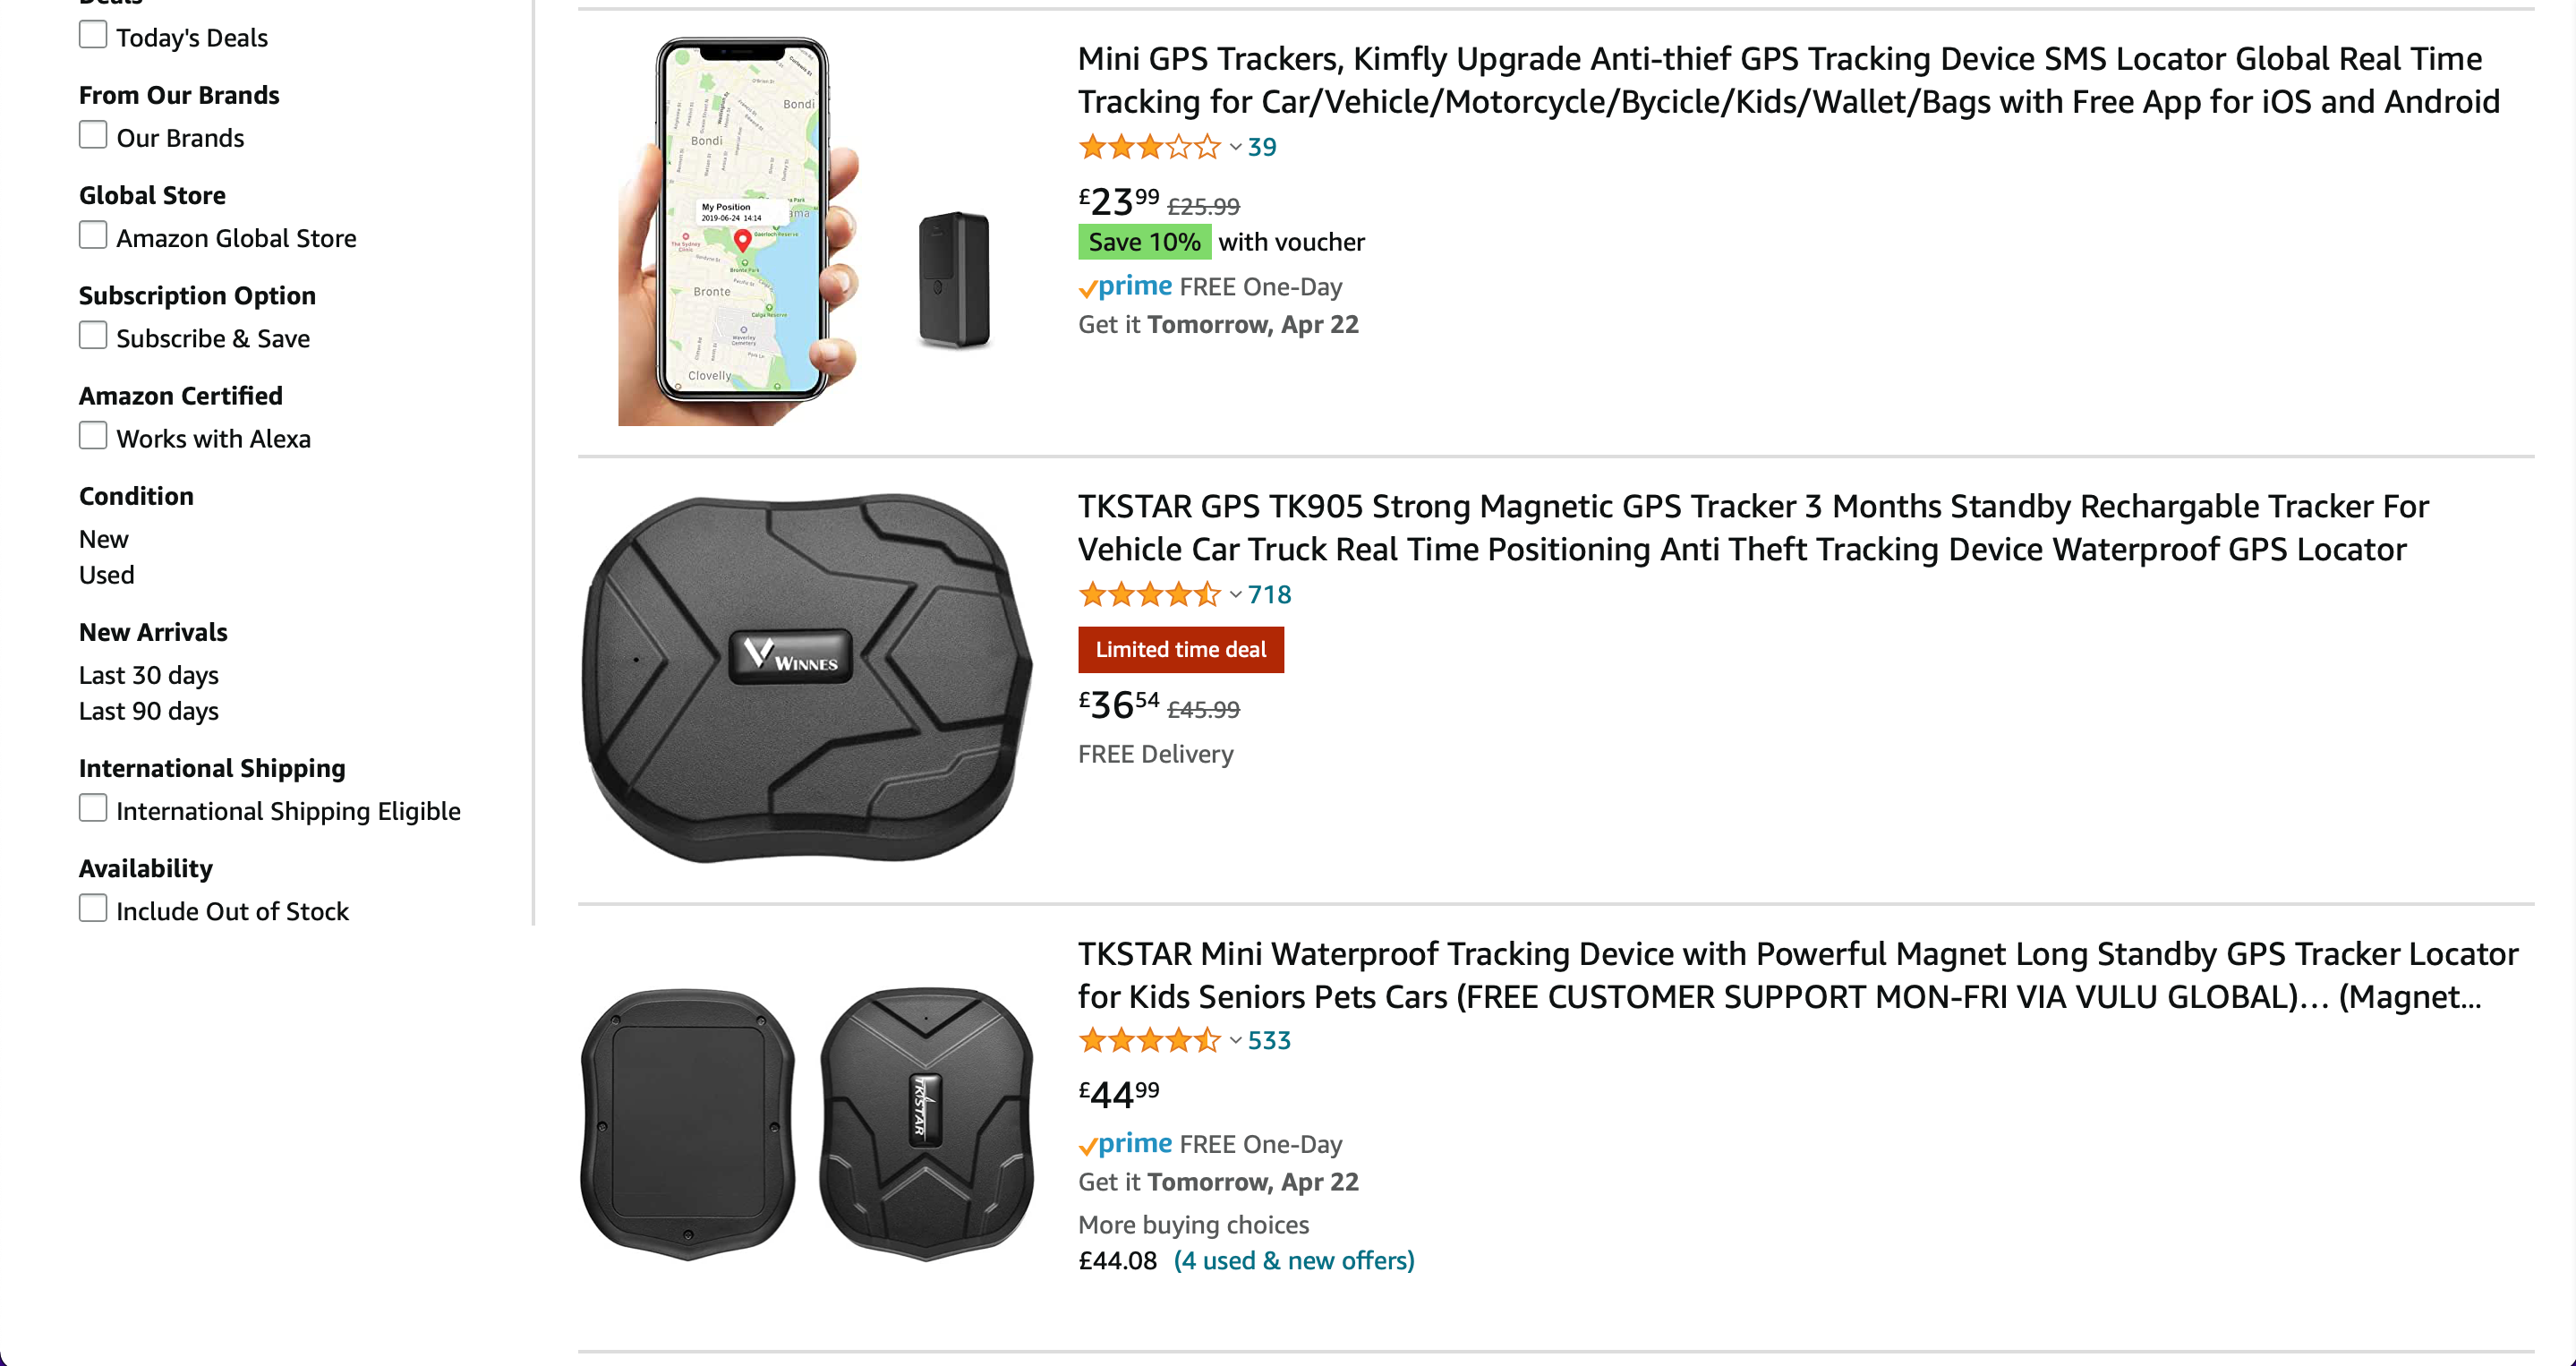 A range of dedicated GPS trackers found on Amazon